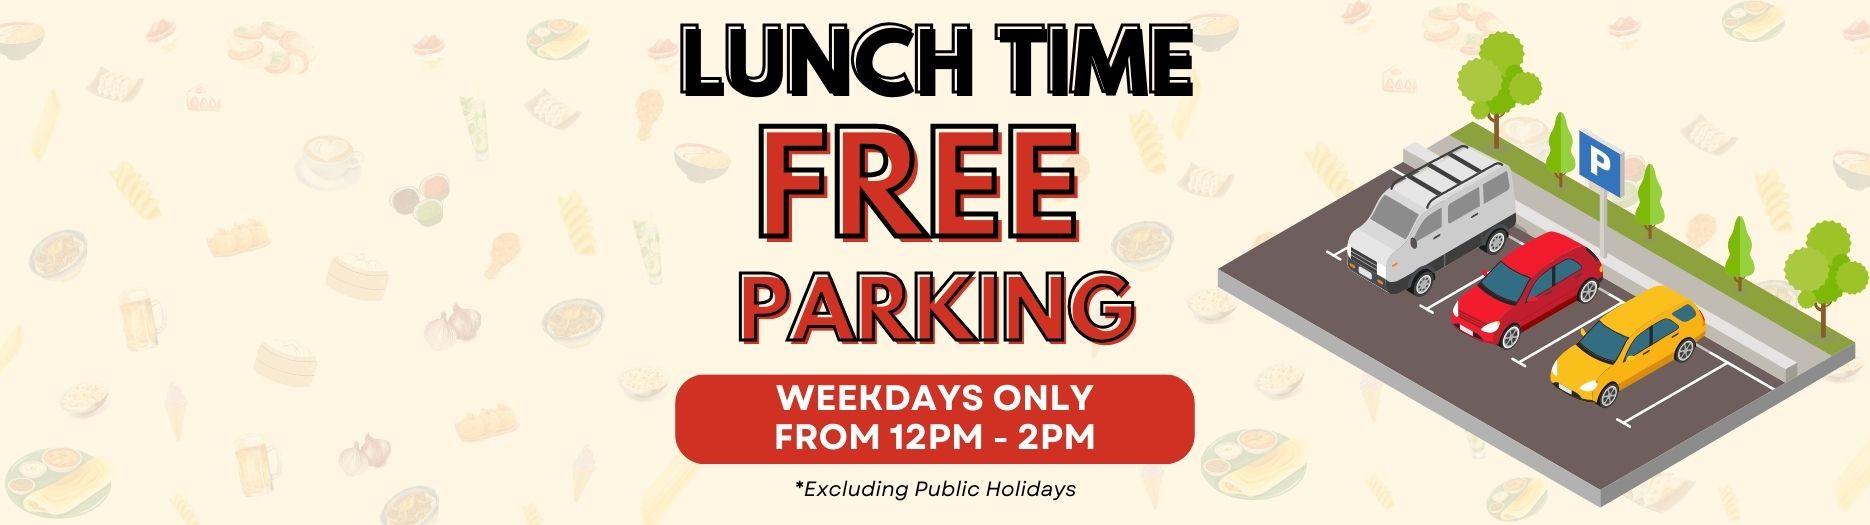 Free Lunch TIme Parking + Lunch Deal (1870 x 525 px)